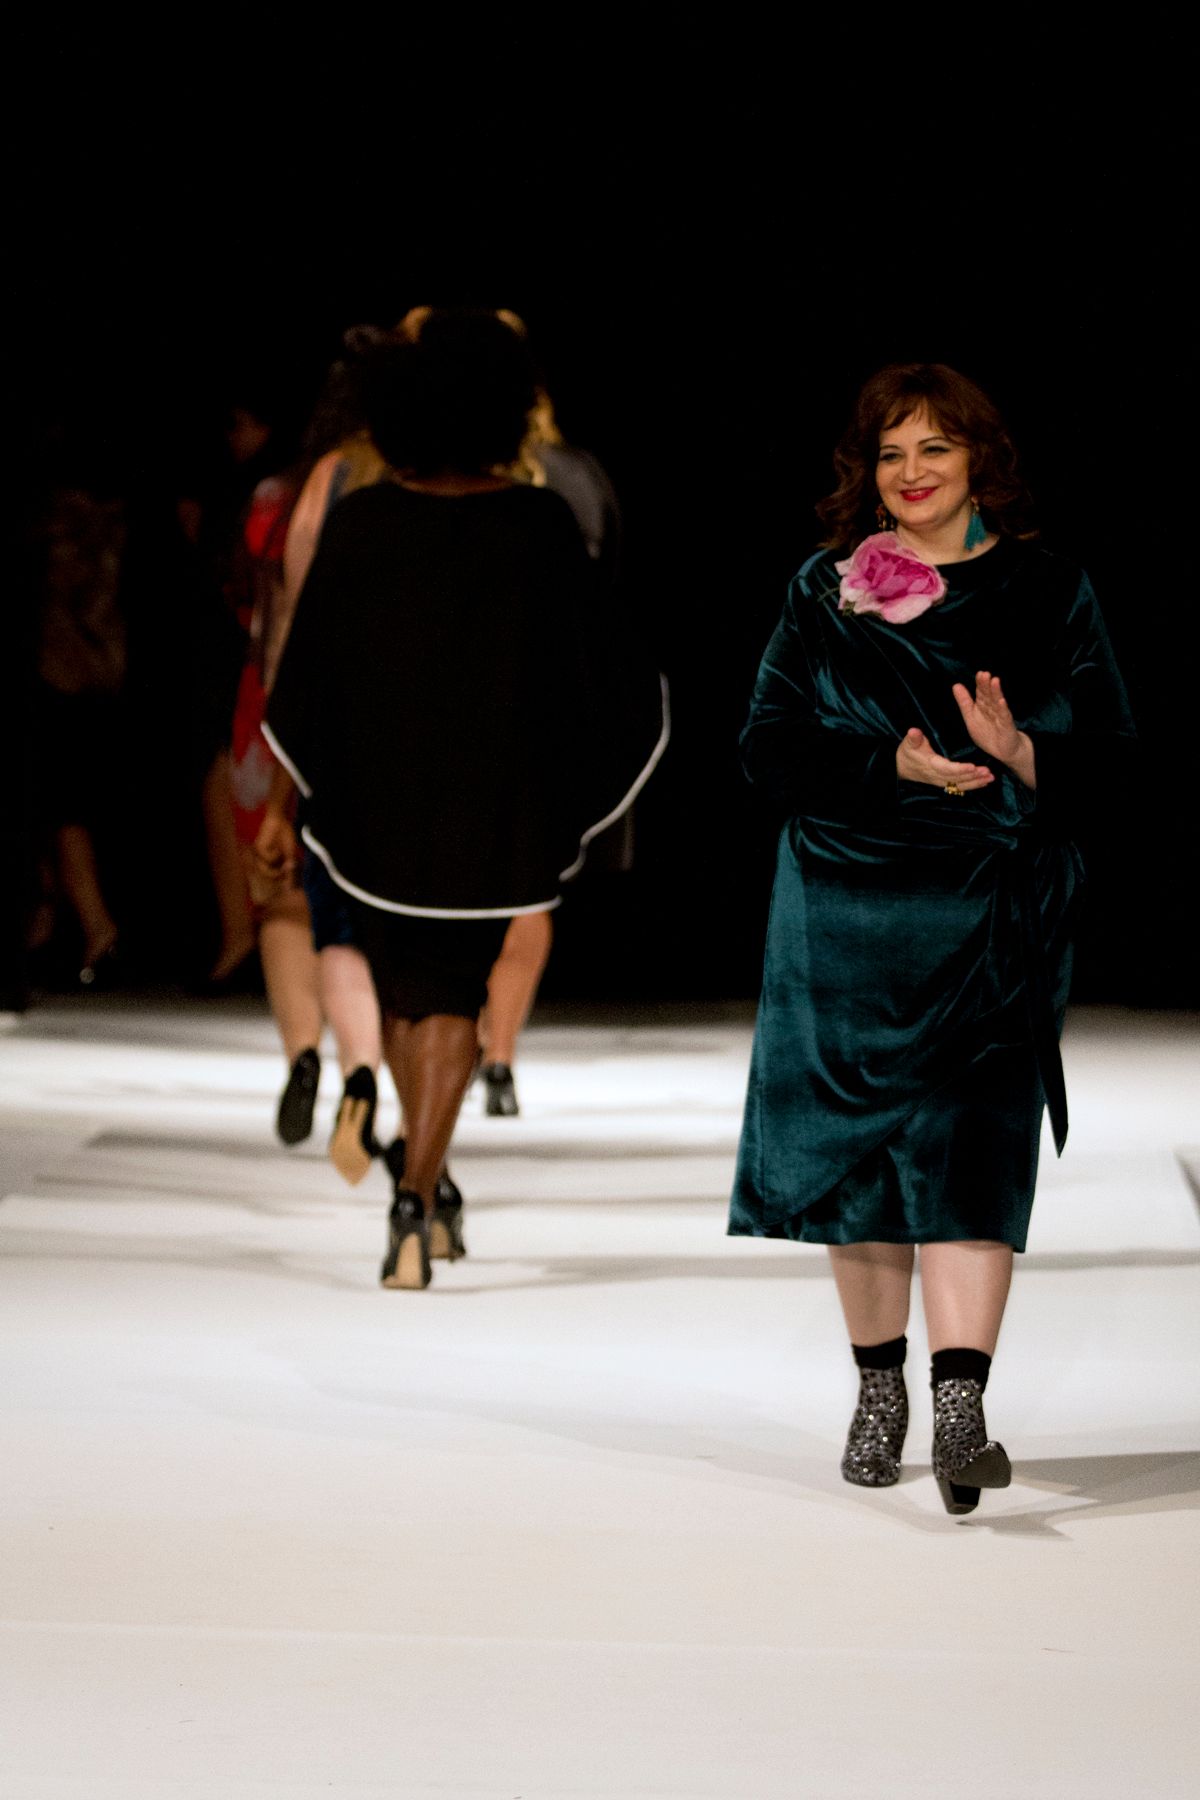 Designer Yona Love, of Yona New York, taking a bow at The World Fashion Parade  | Photographed by David Guerrieri